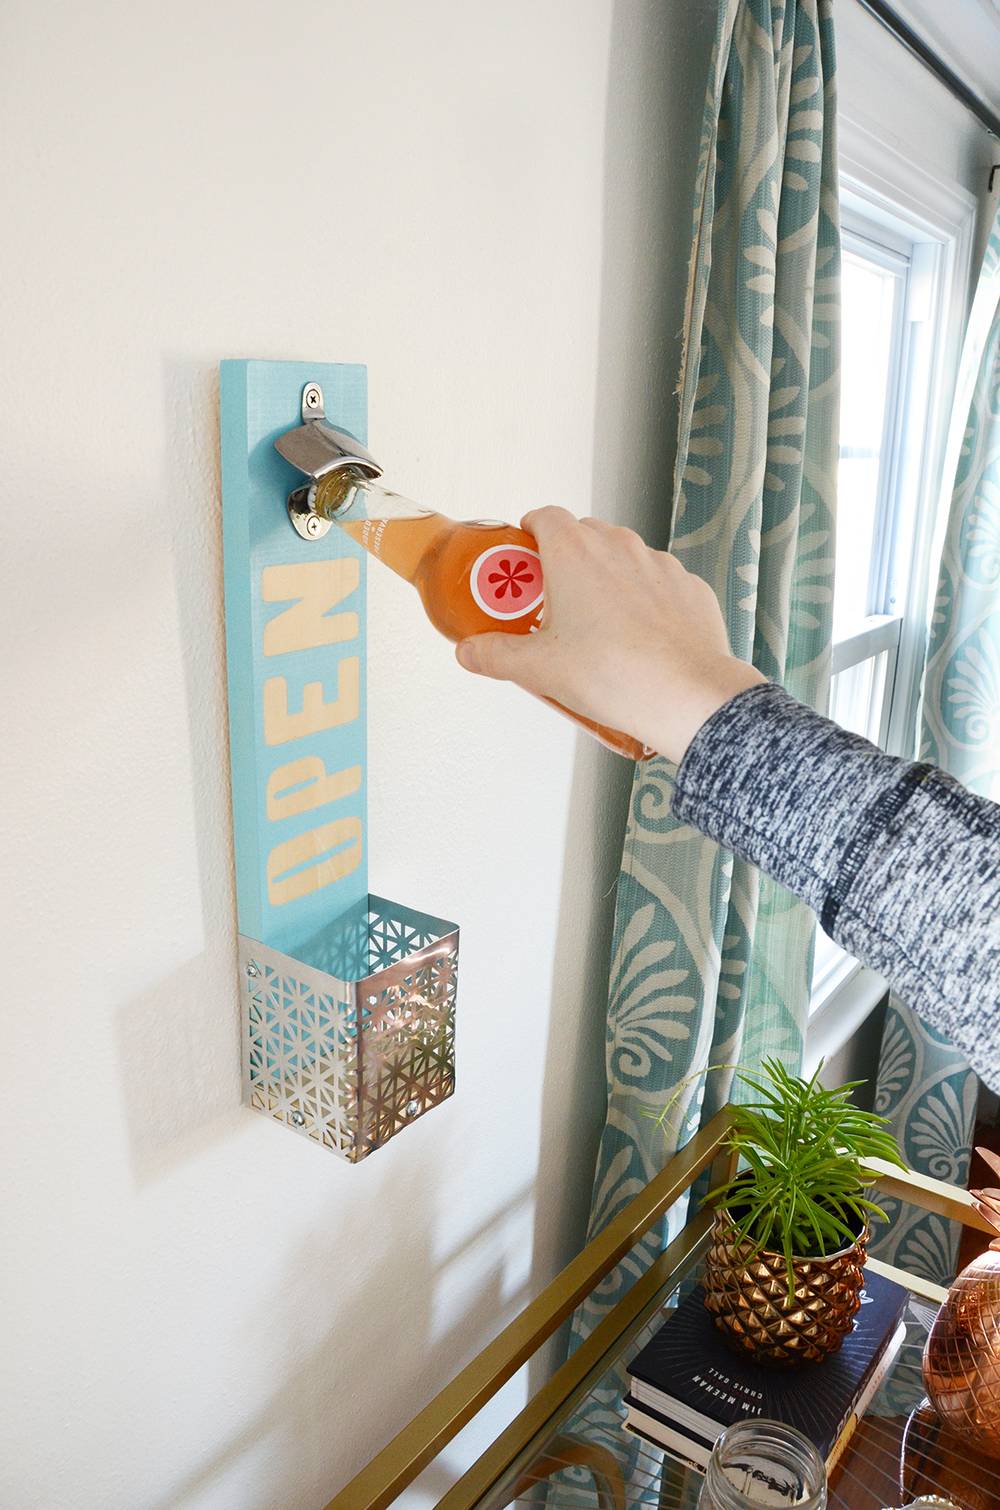 Finished wall mounted bottle opener - used for taking caps off glass bottles